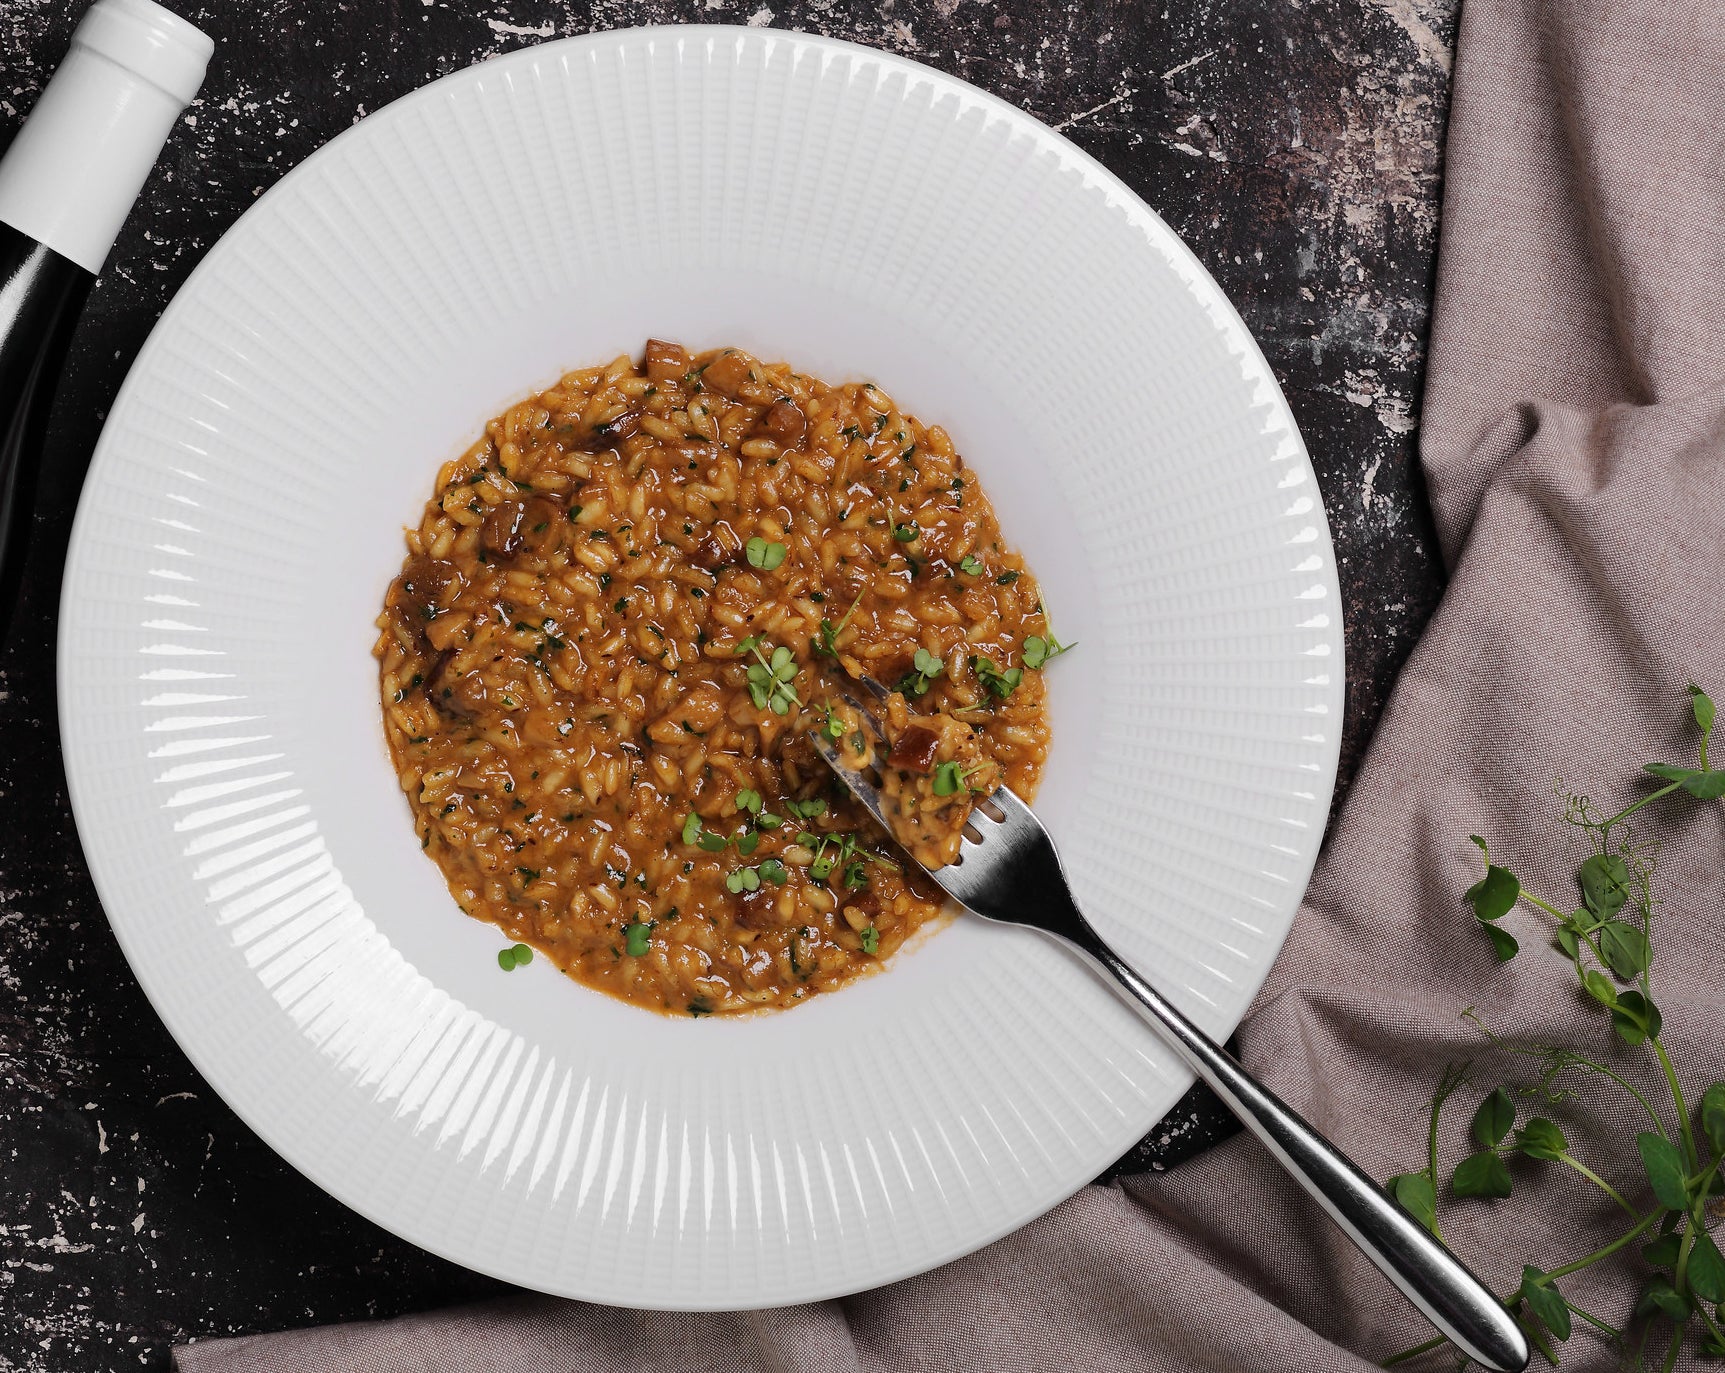 Risotto made with red wine and mushrooms in a bowl.